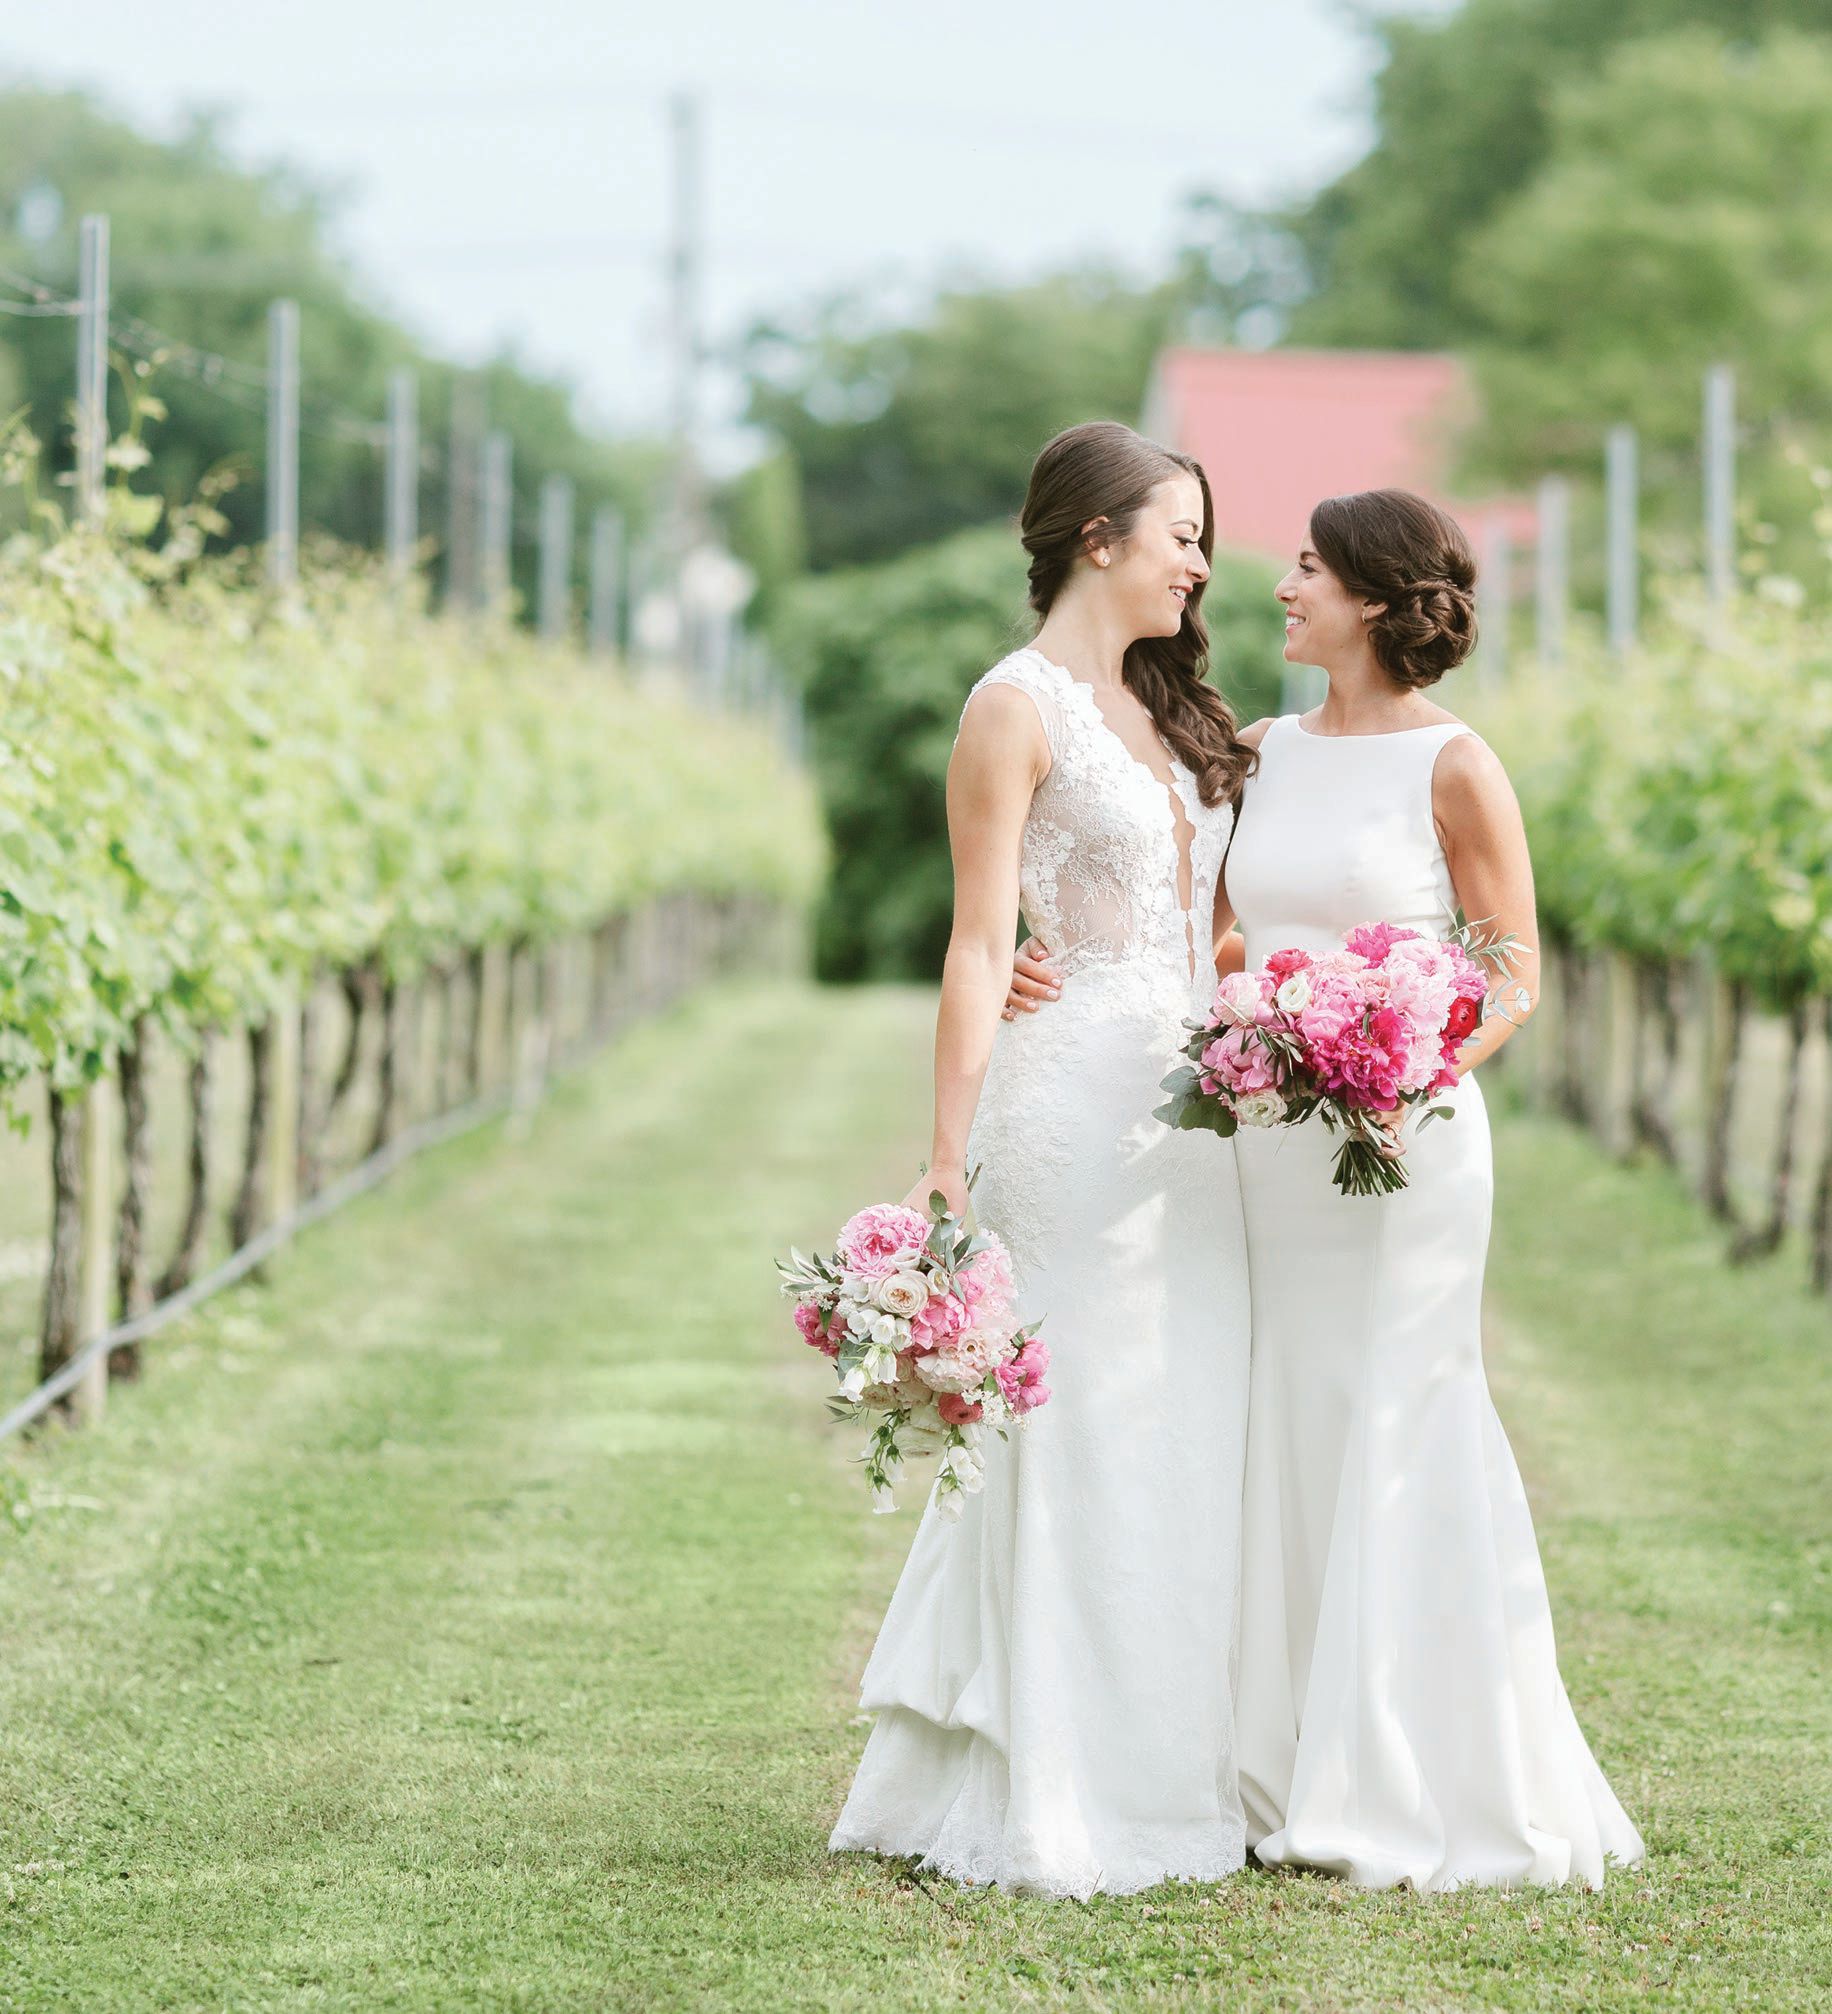 Ashley (left) and Katie at Willow Creek Winery. Photographed by Grace Ardor Photography